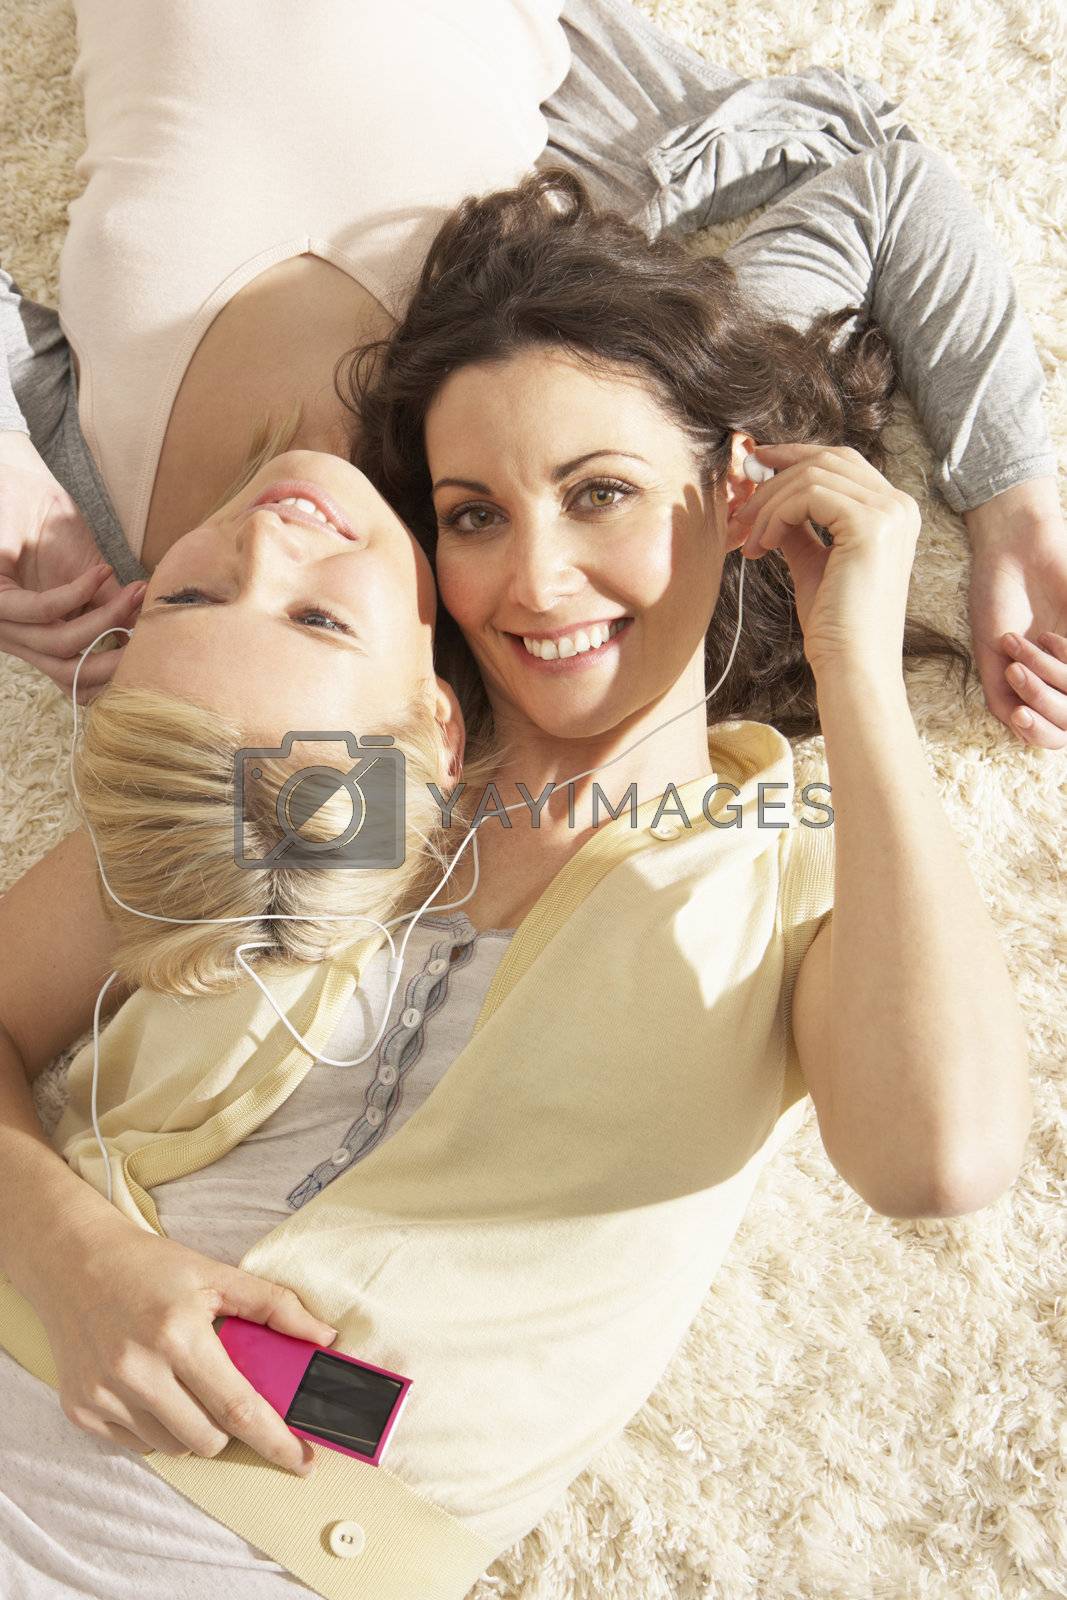 Royalty free image of Two Women Listening To MP3 Player On Headphones Together Relaxin by omg_images